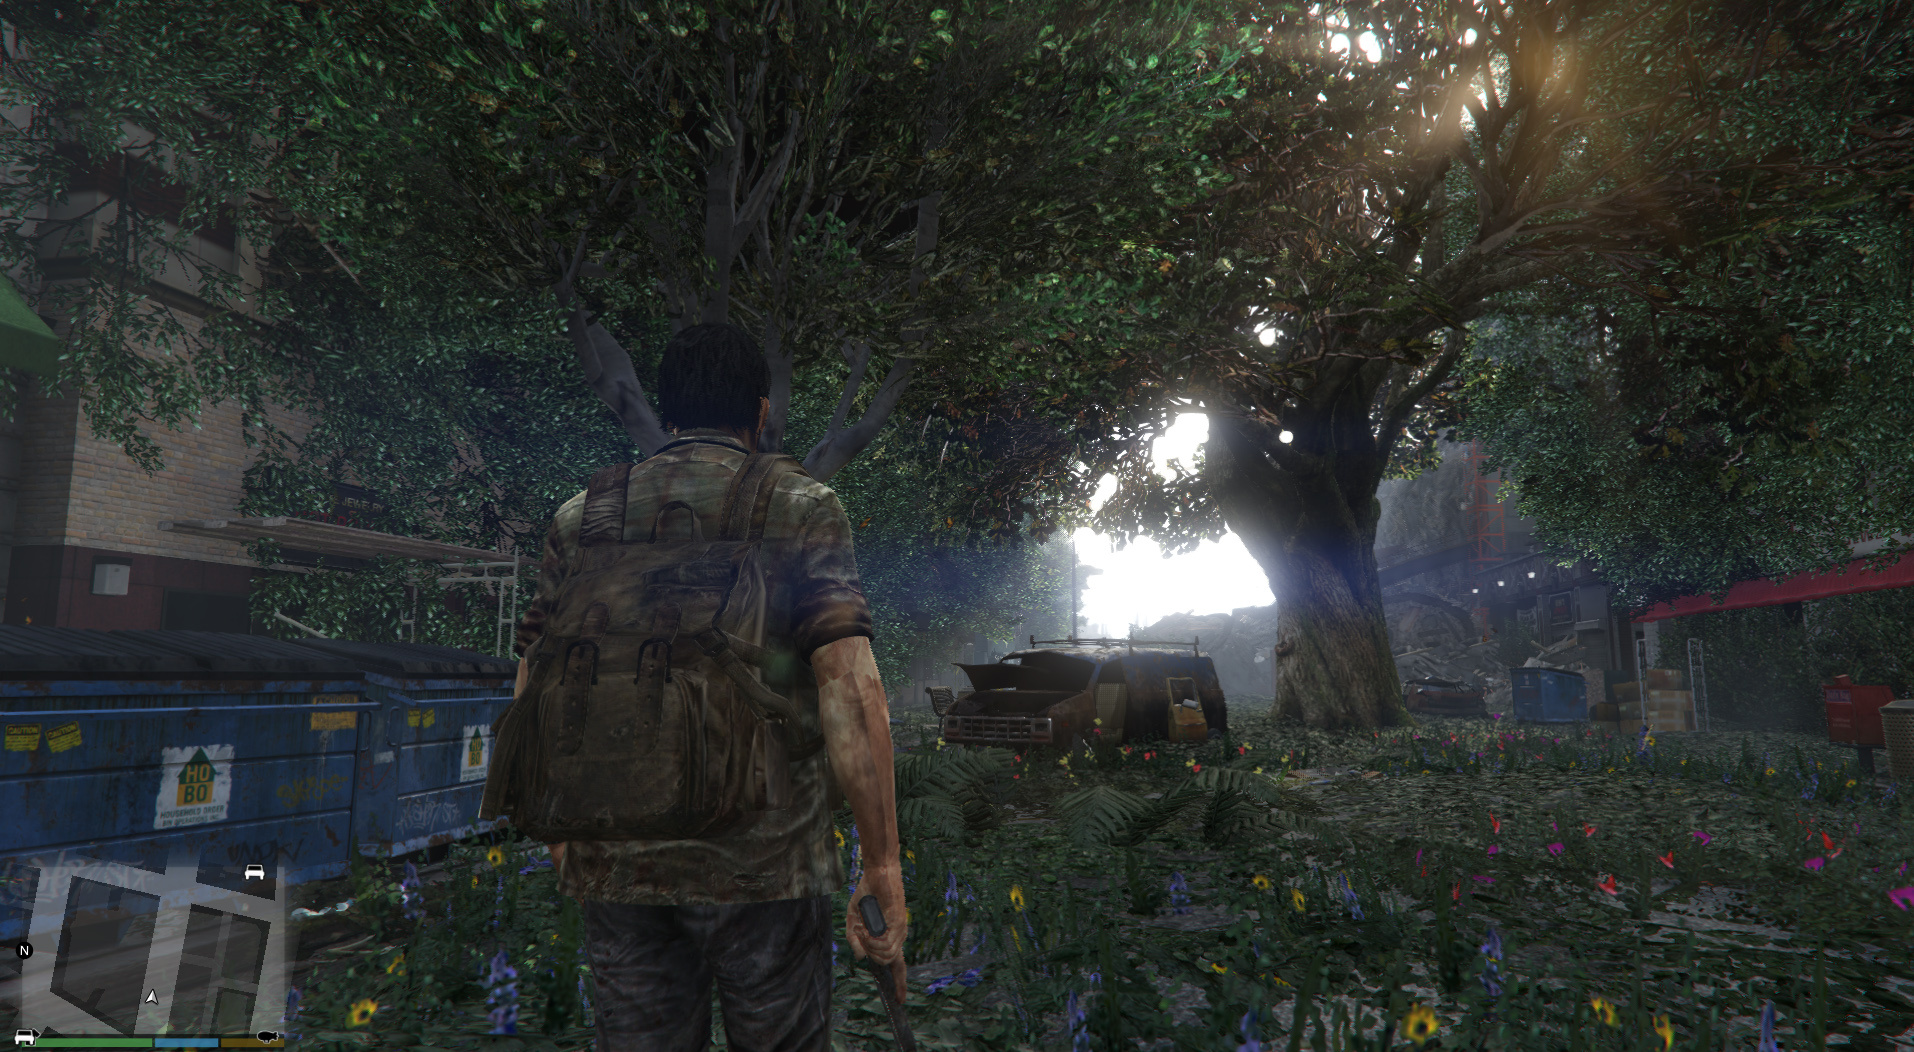 The Last of Us GTA V Mods Look Incredible!